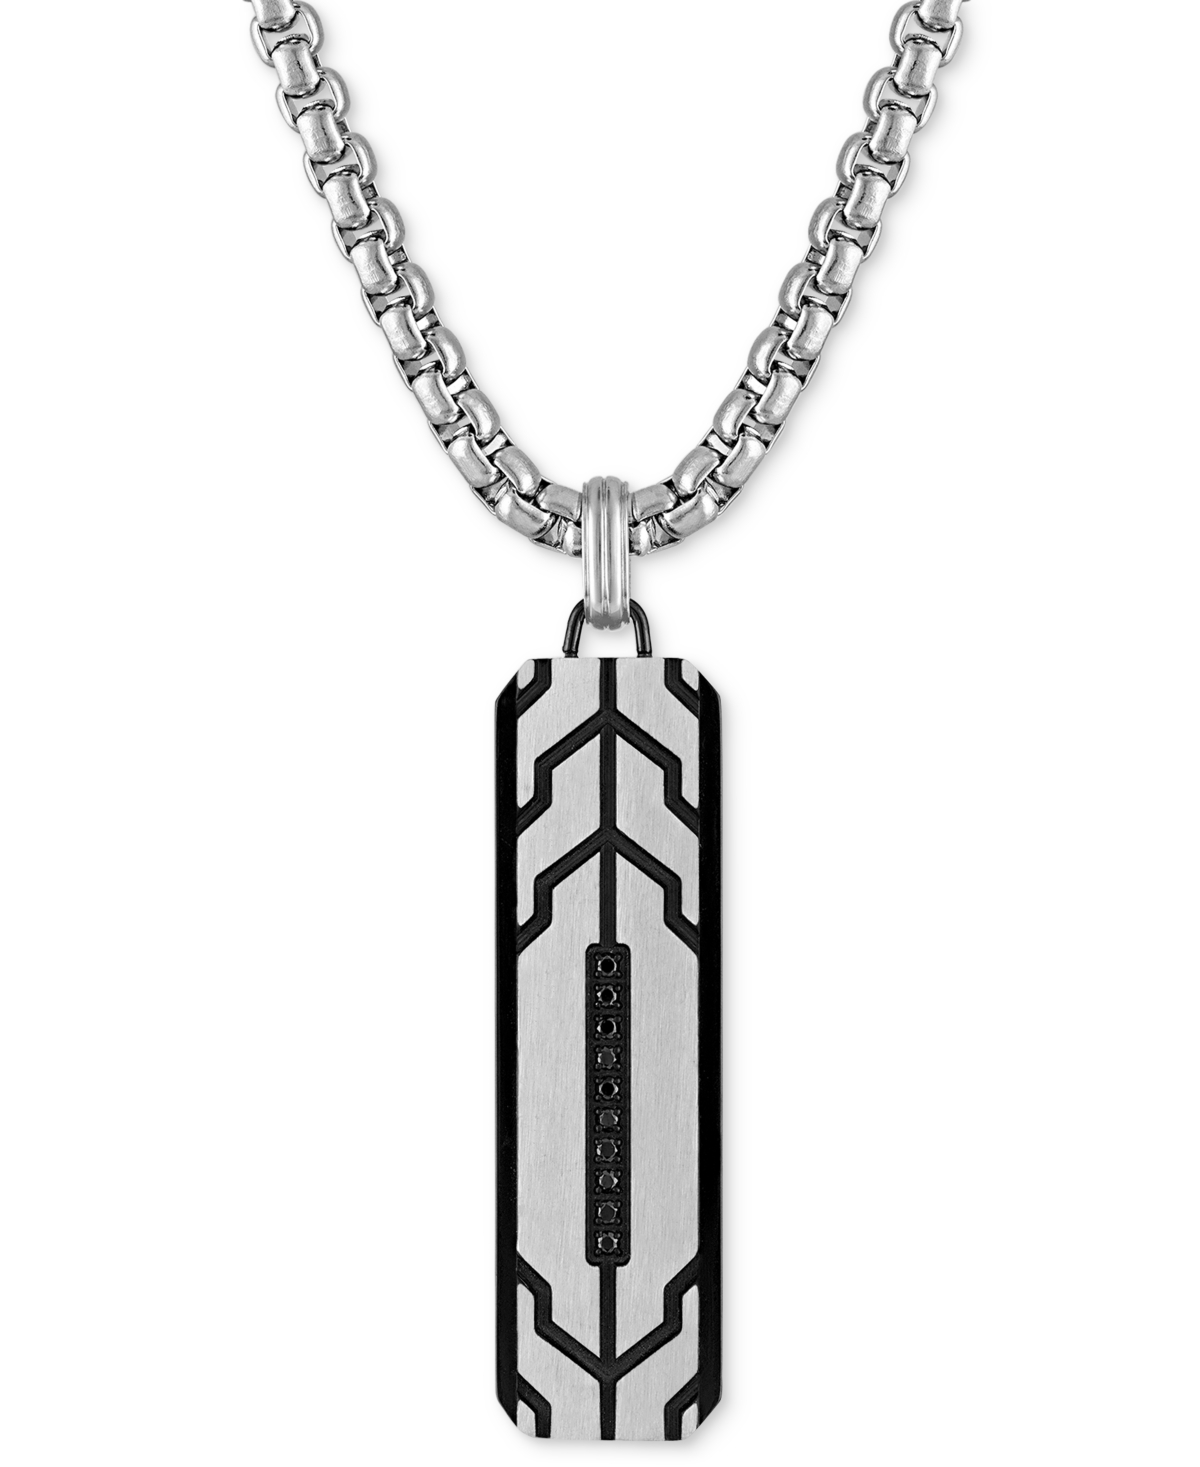 Black Diamond Dog Tag 22" Pendant Necklace in Stainless Steel & Black Ion-Plate, Created for Macy's - Black